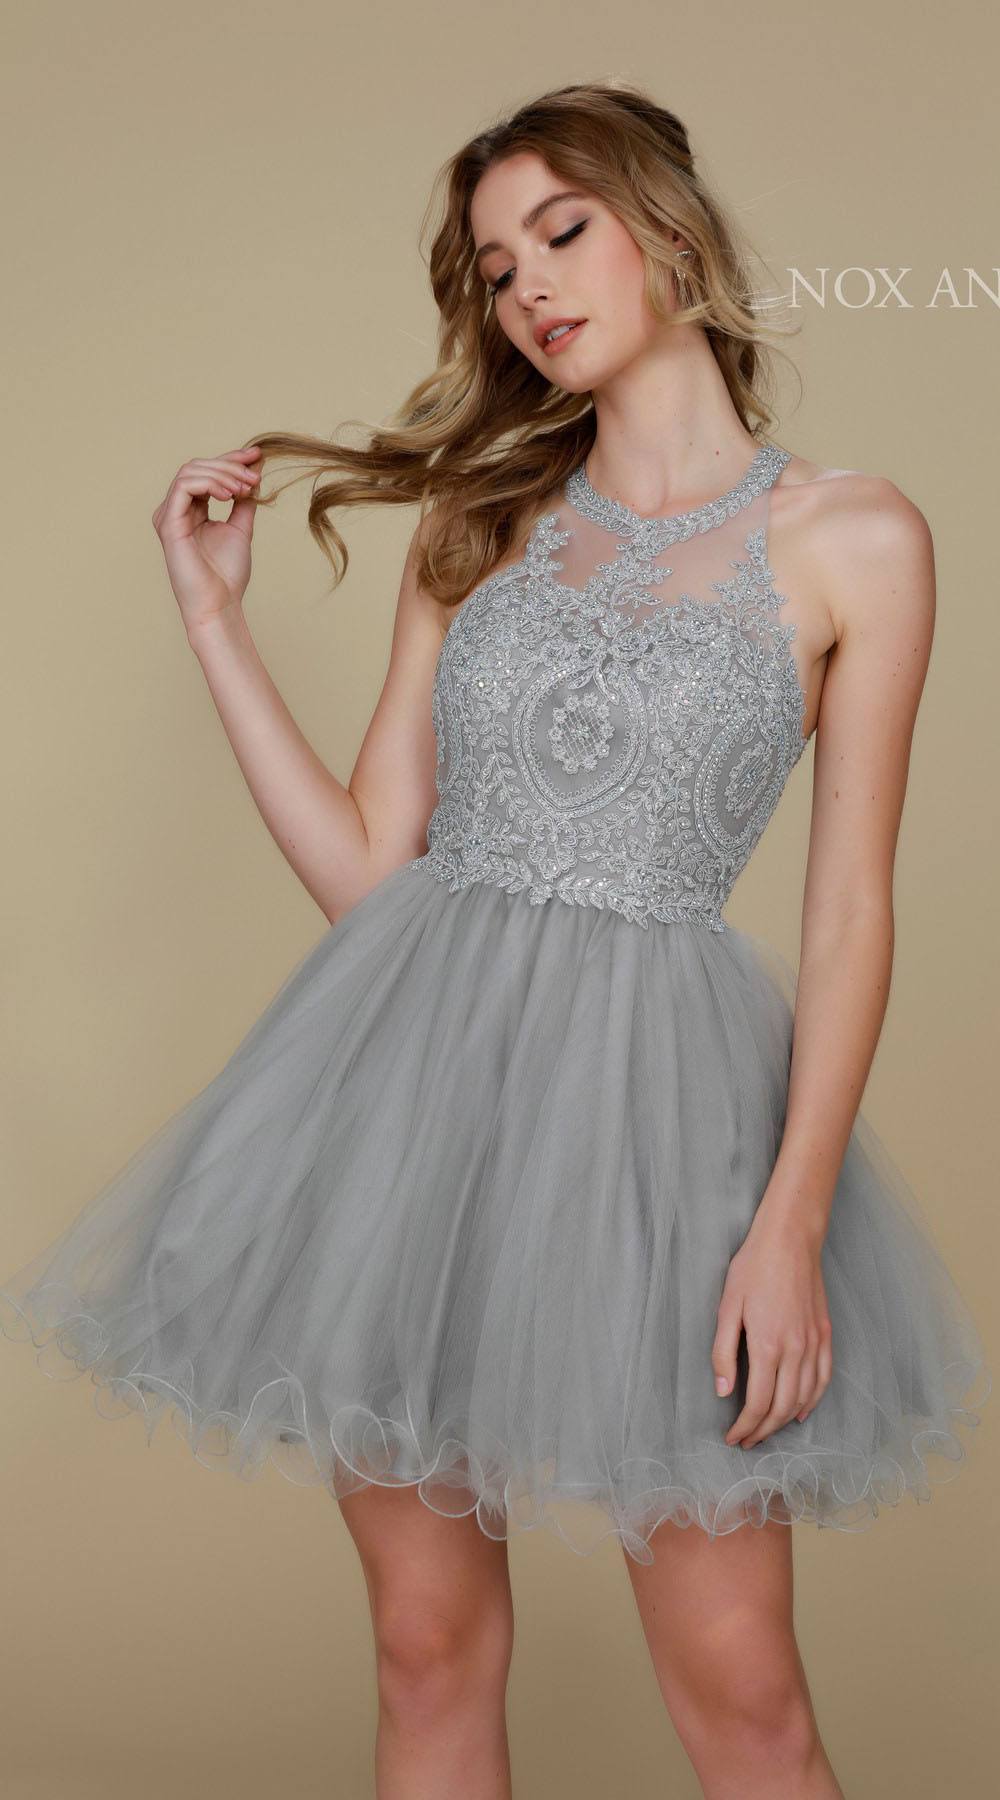 Short Silver Homecoming Dress Poofy A Line Tulle Skirt Halter Neck